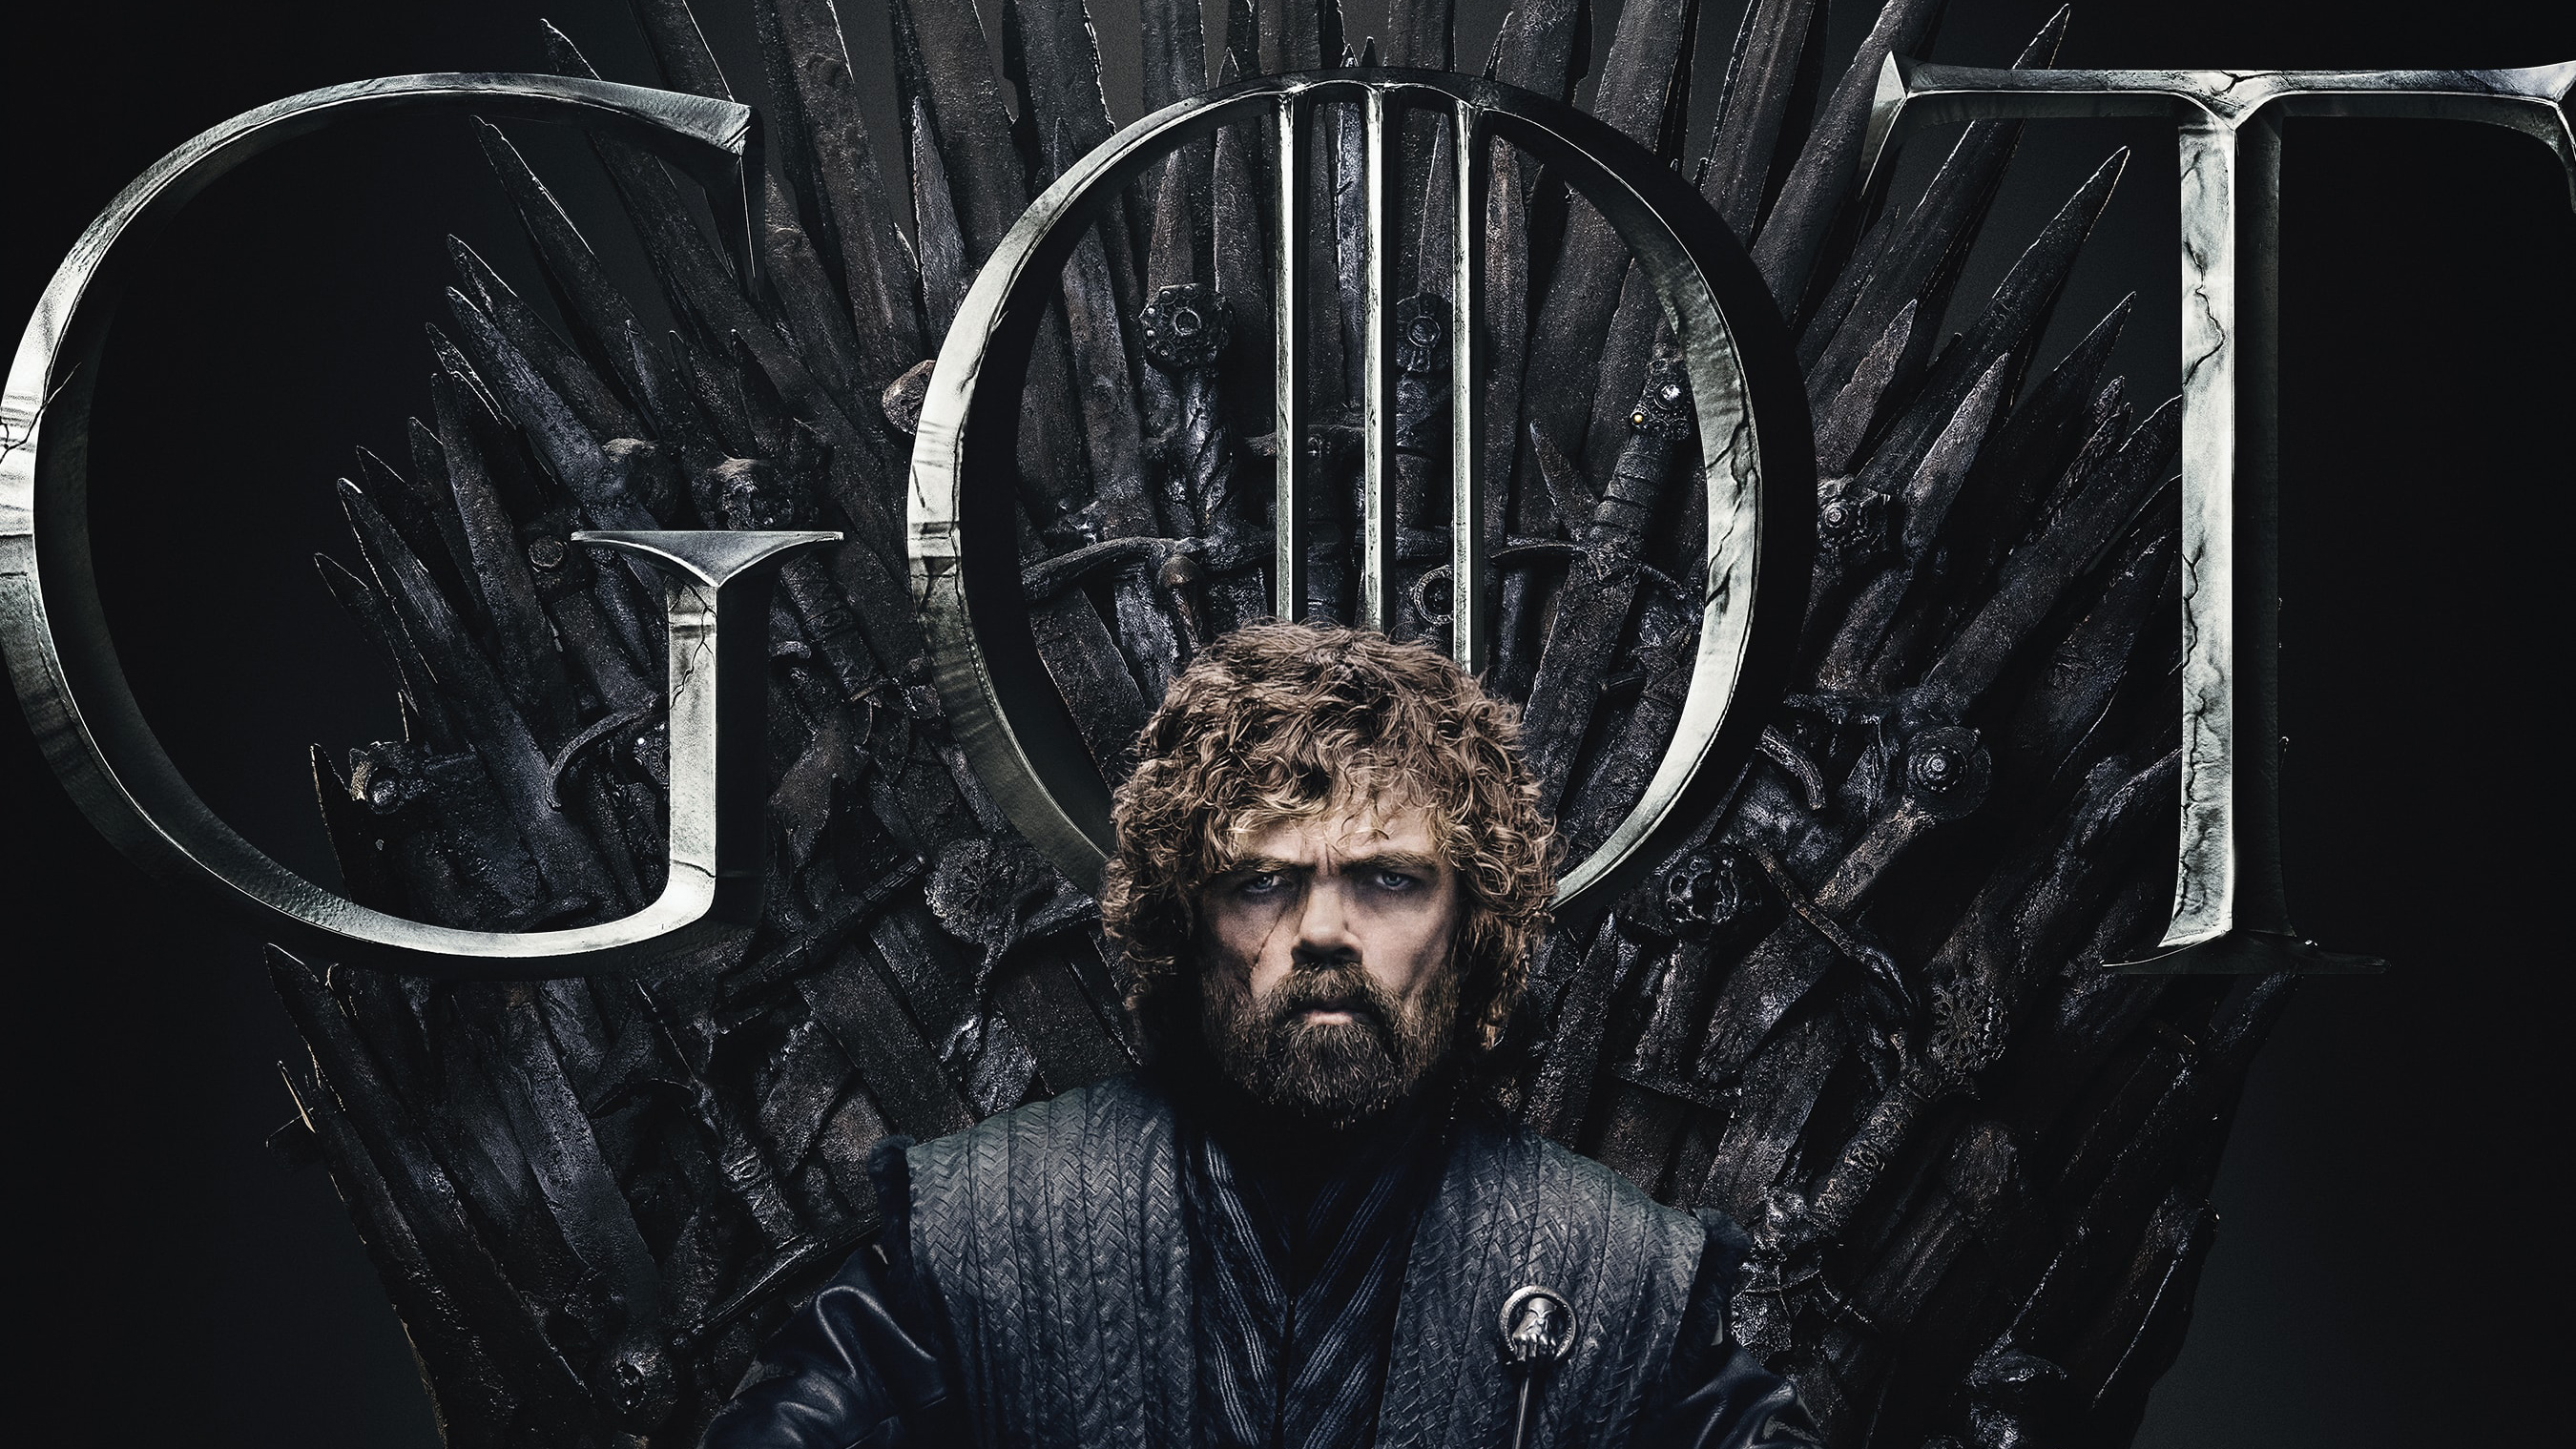 Wallpapers Tyrion Lannister Game of Thrones season 8 Game Of Thrones on the desktop